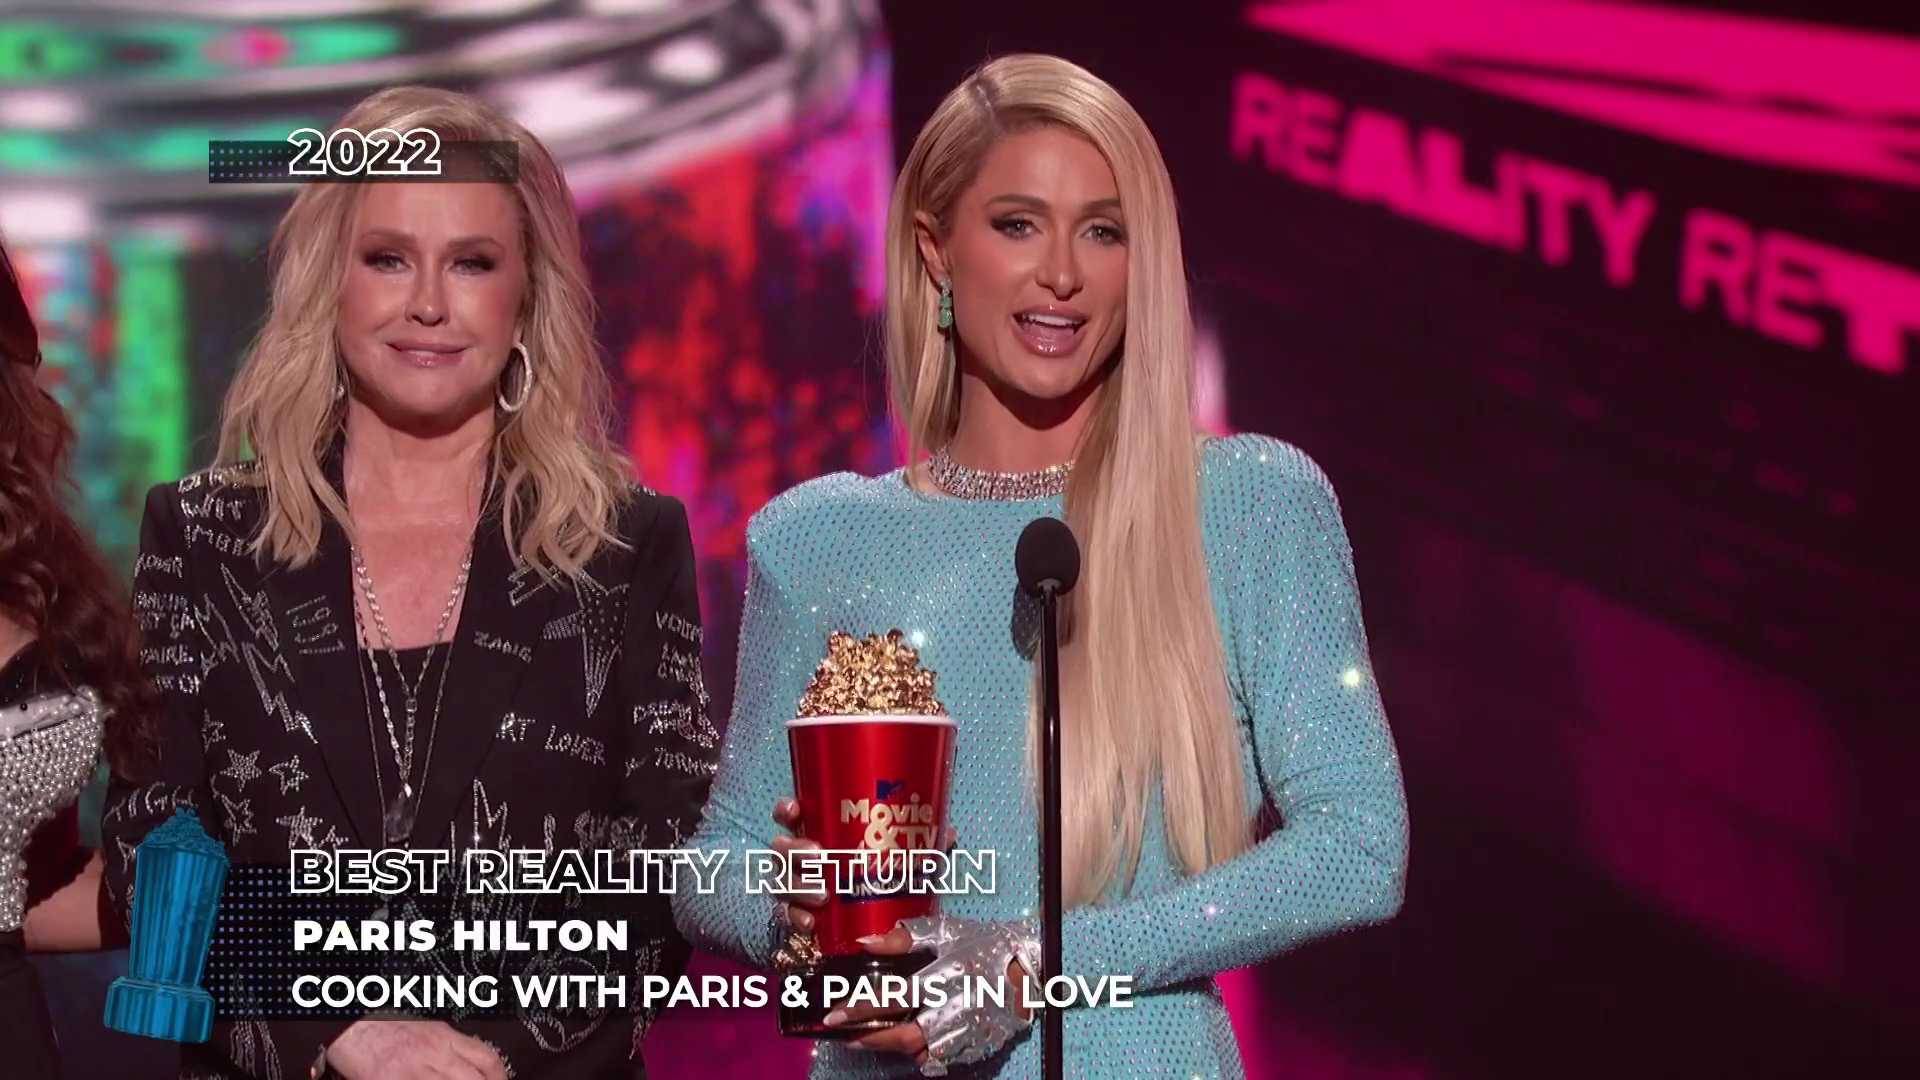 Paris Hilton accepts the award for Best Reality Return at the Movie and TV Awards 2022.